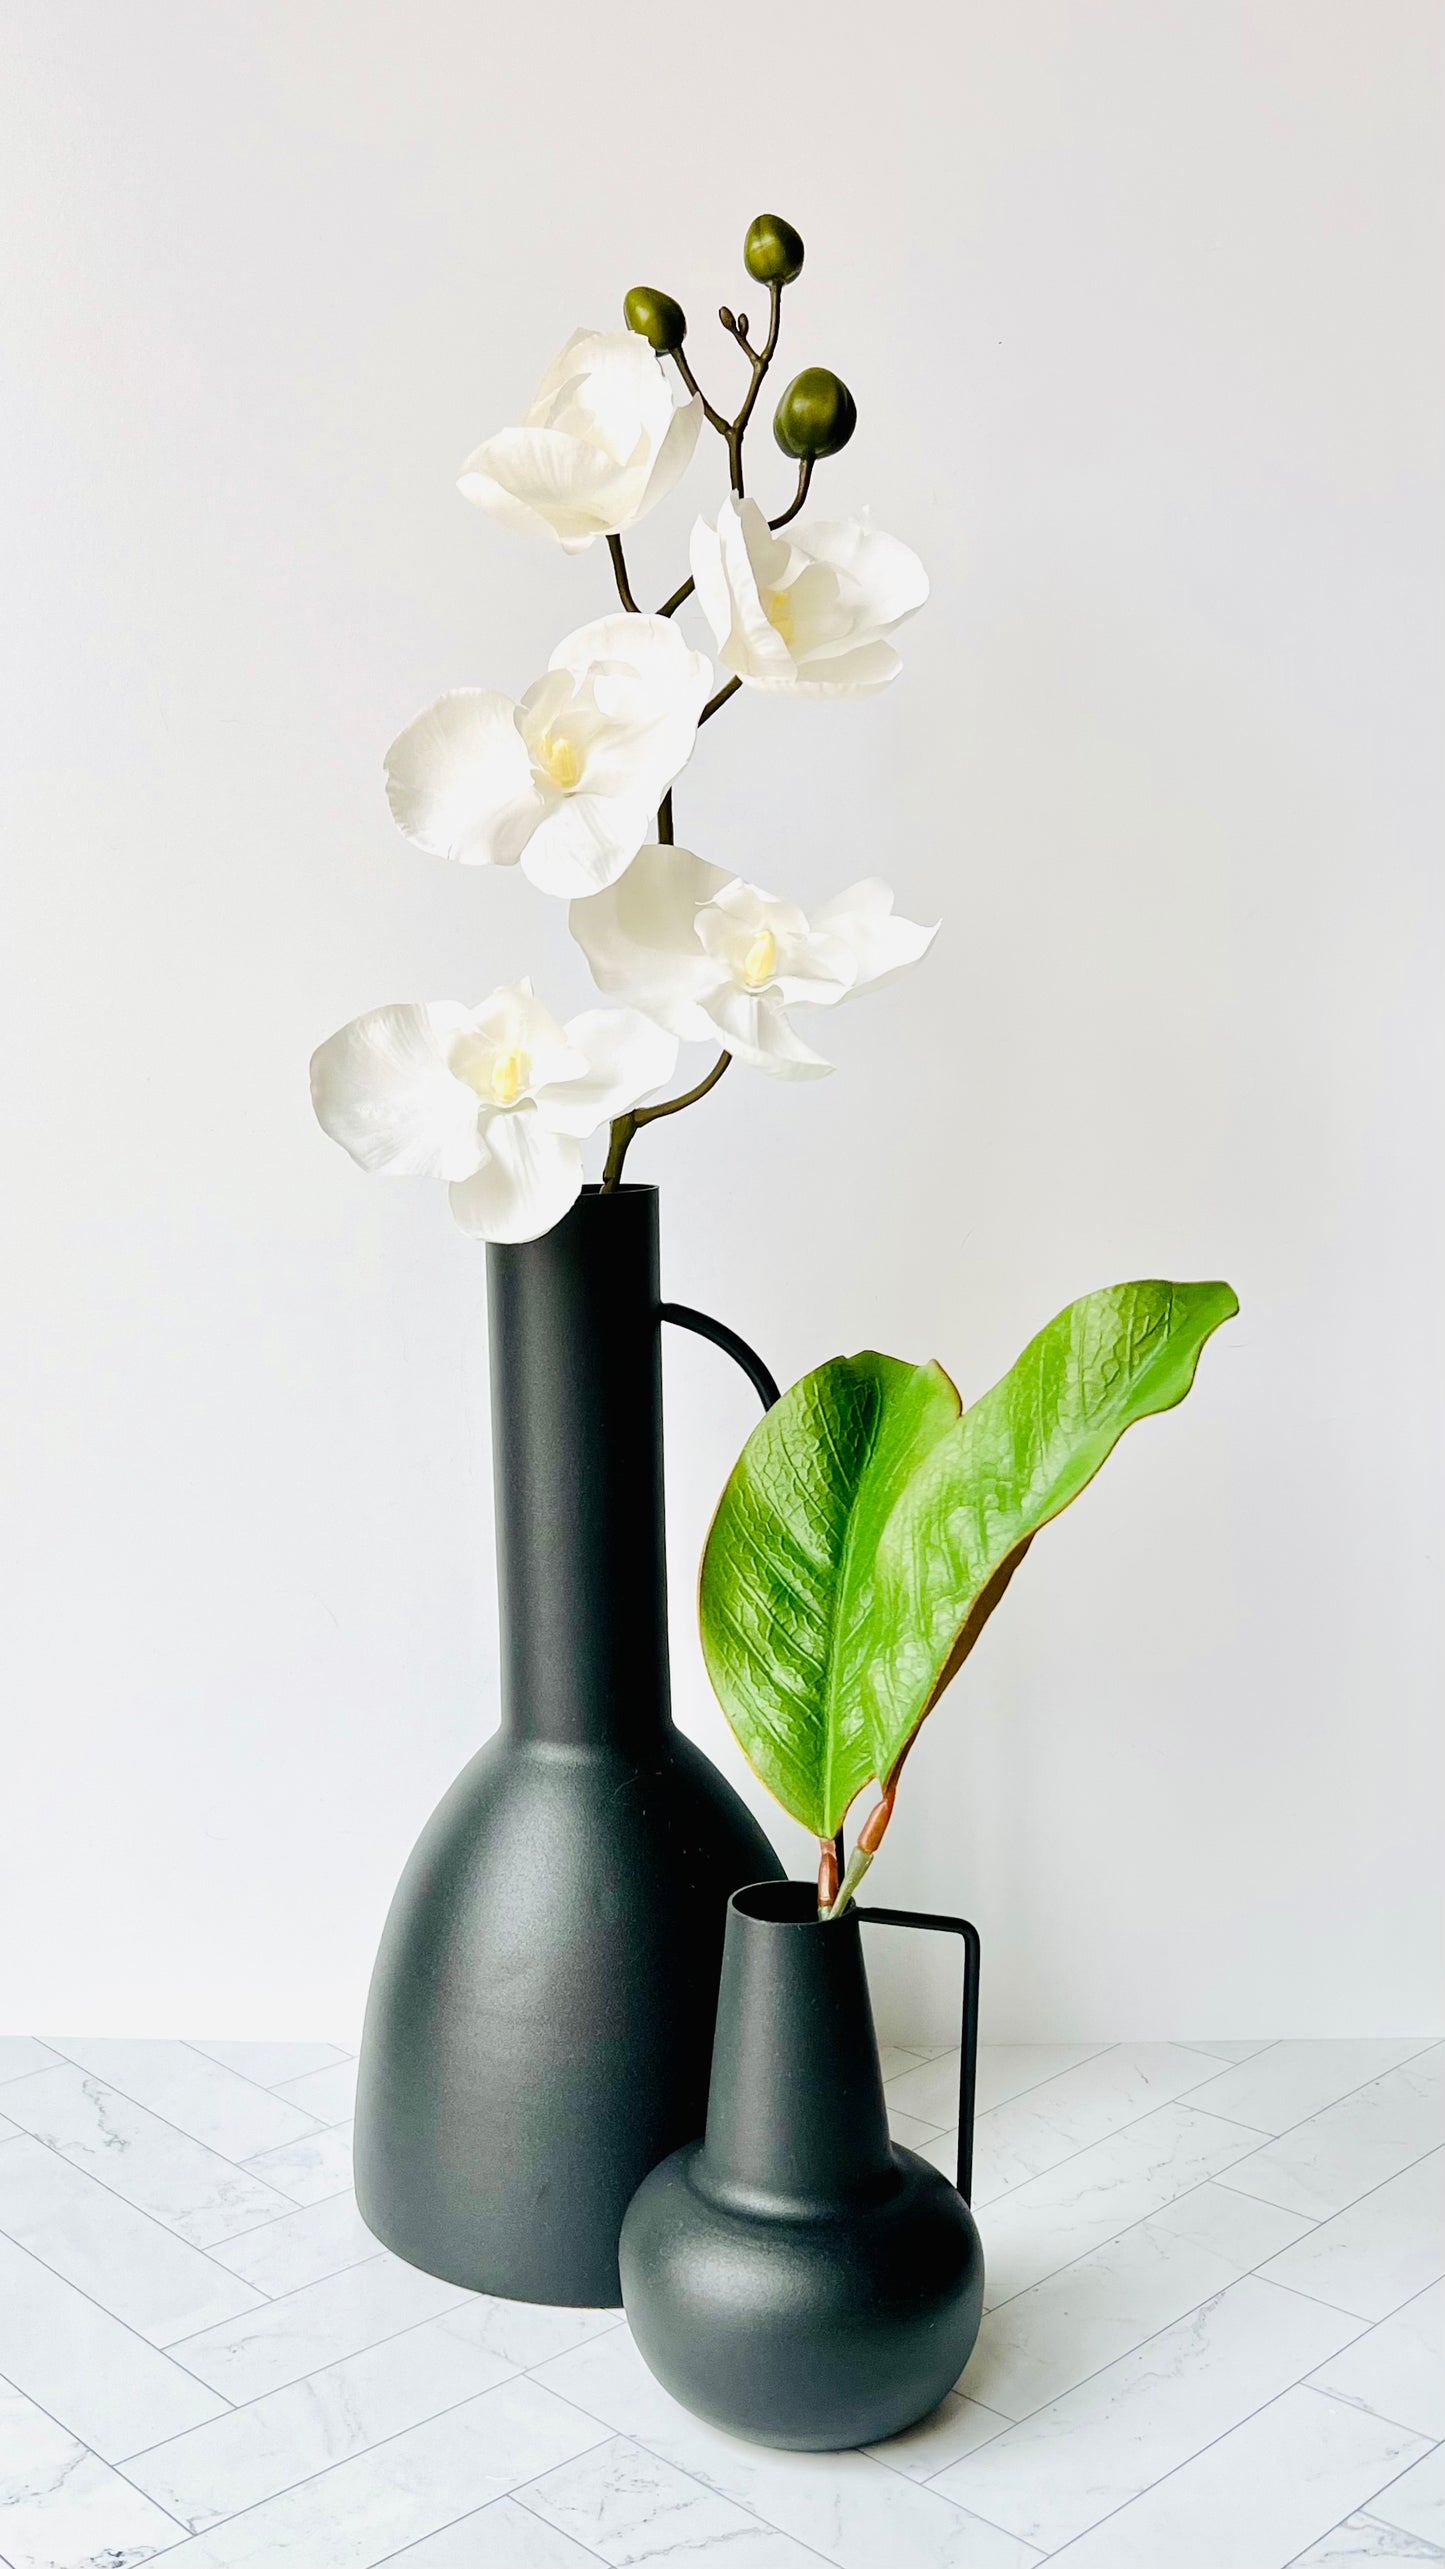 A small black bud vase and larger black vase filled with greenery and flowers, respectively